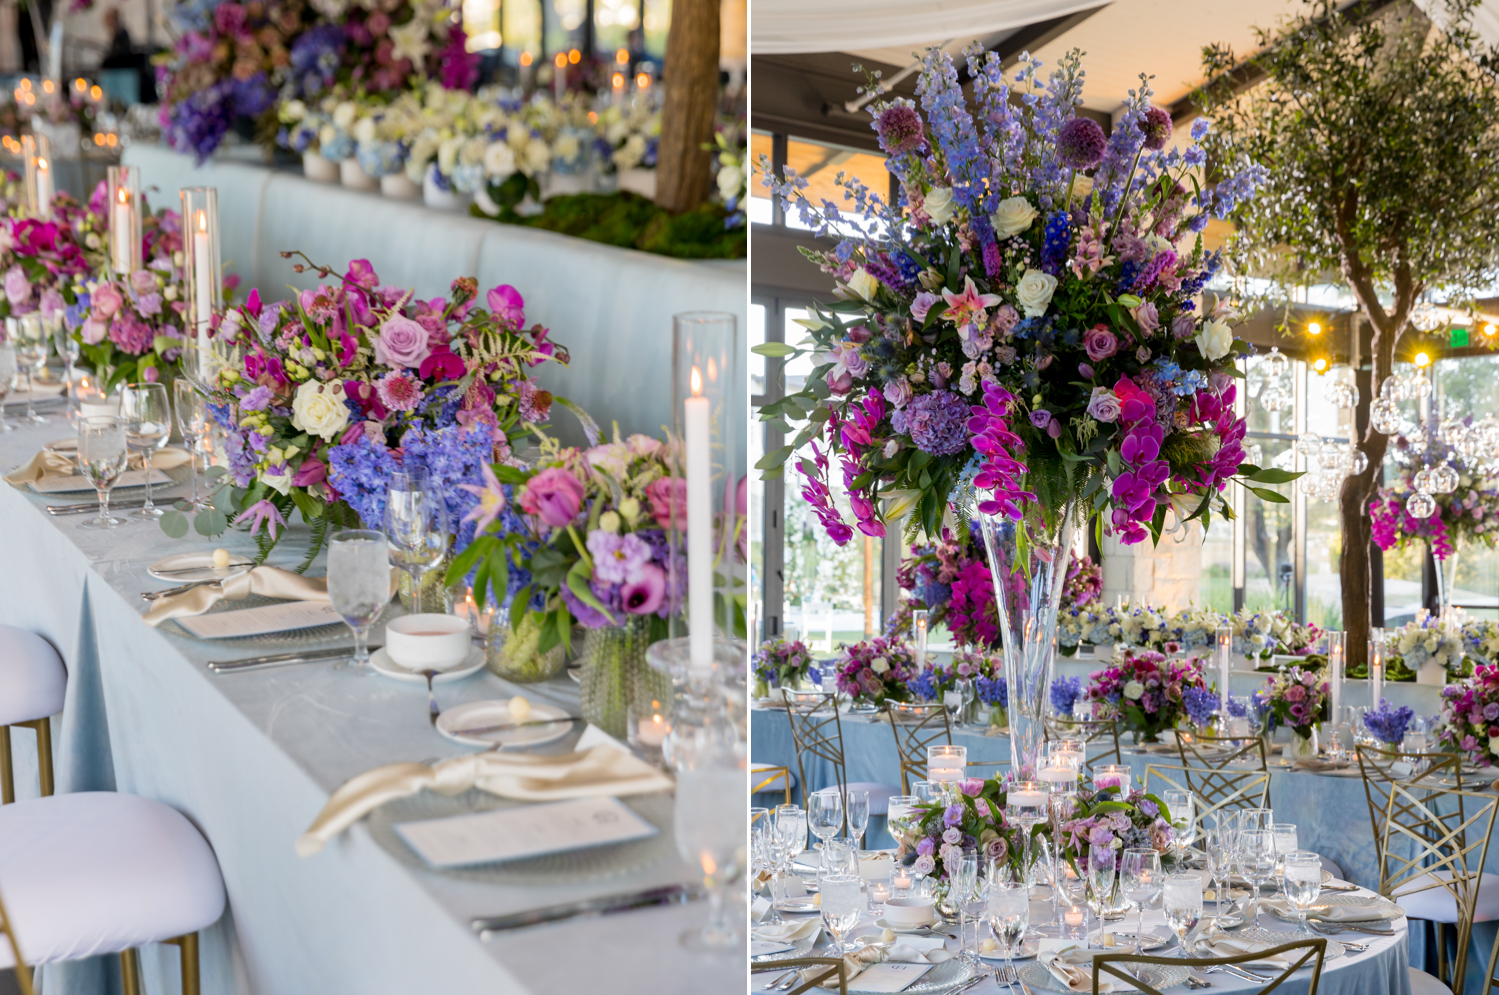 Beautiful blue, purple, and pink flower arrangements on the dinner tables at the reception.